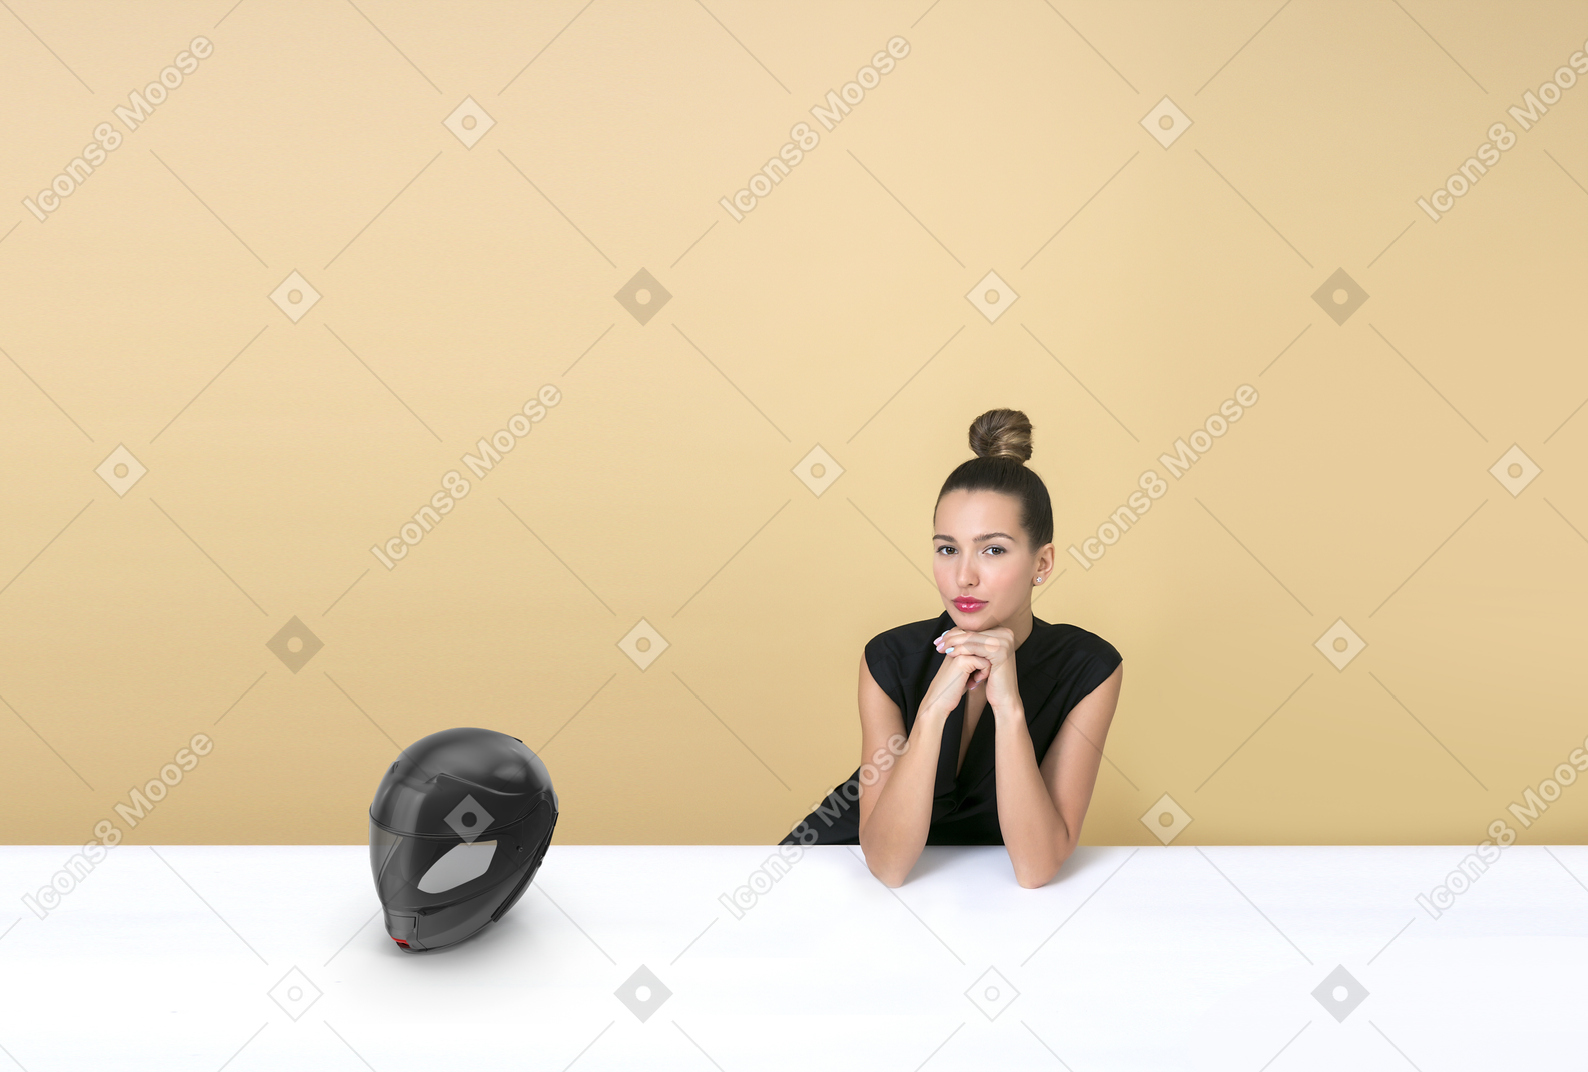 Young woman sitting at a table near a moto helmet